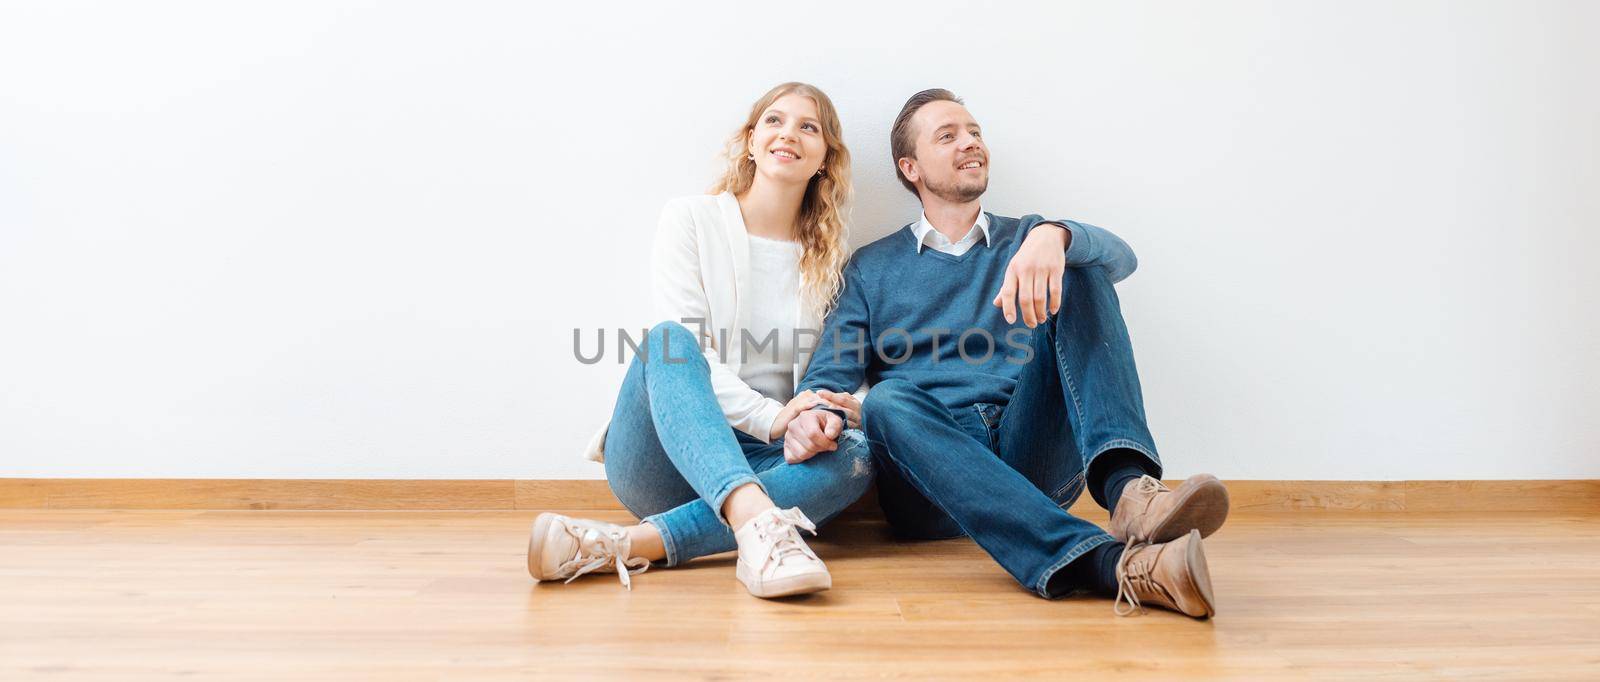 Couple dreaming about their future in the new apartment sitting on the floor